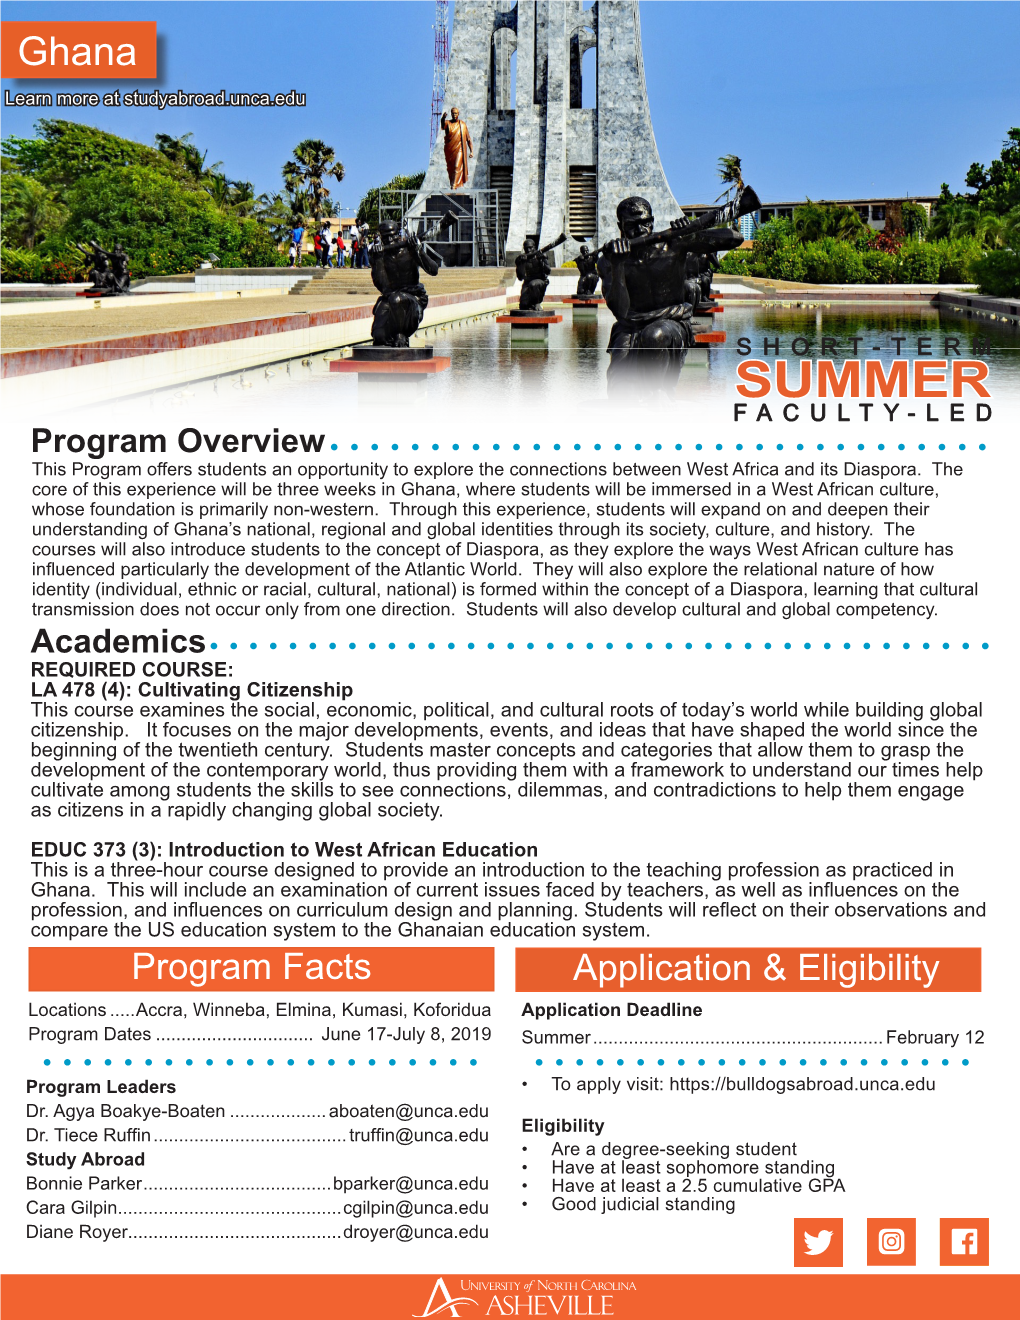 SUMMER FACULTY-LED Program Overview This Program Offers Students an Opportunity to Explore the Connections Between West Africa and Its Diaspora